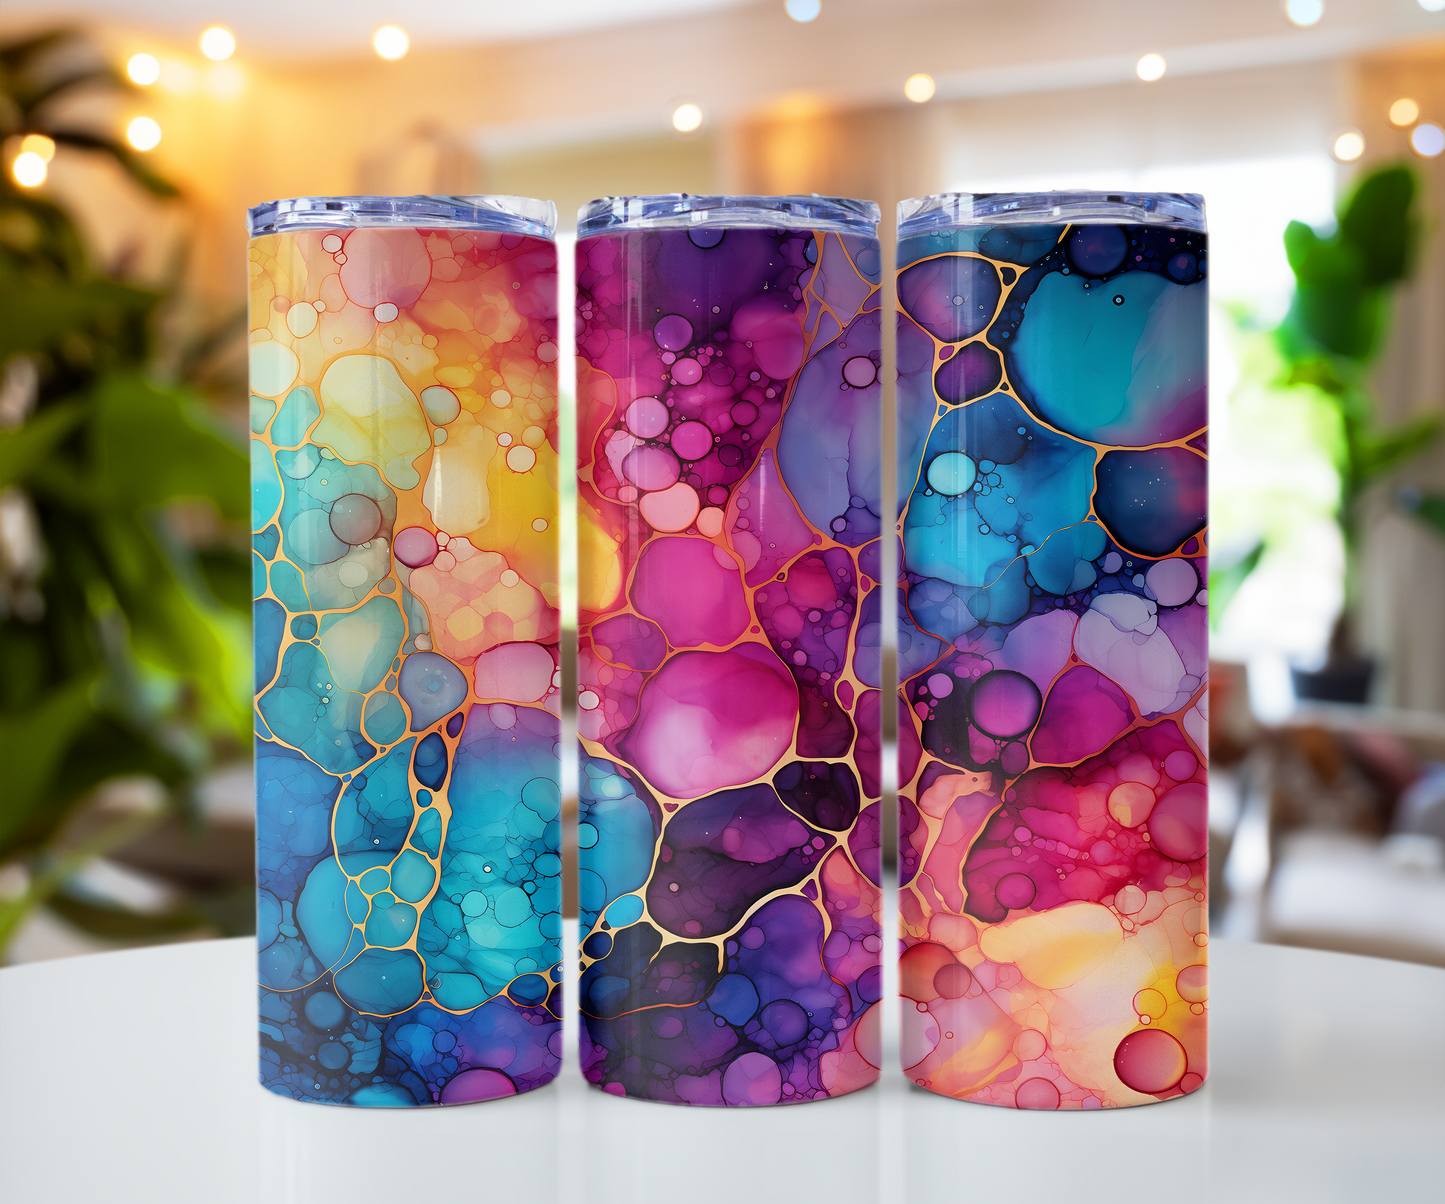 Alcohol Ink Explosion Stainless steel tumbler CedarHill Country Market